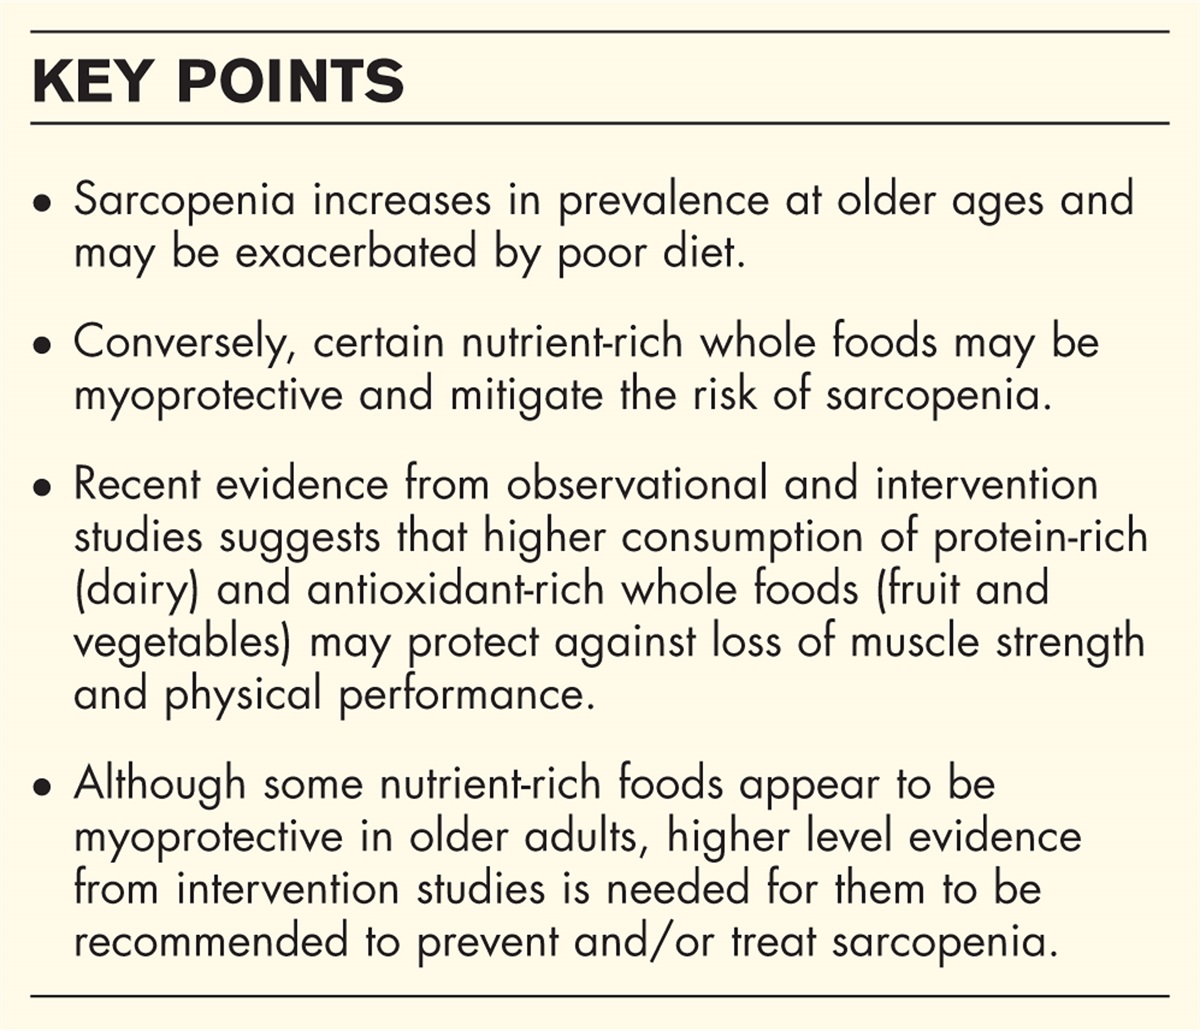 Myoprotective whole foods, muscle health and sarcopenia in older adults